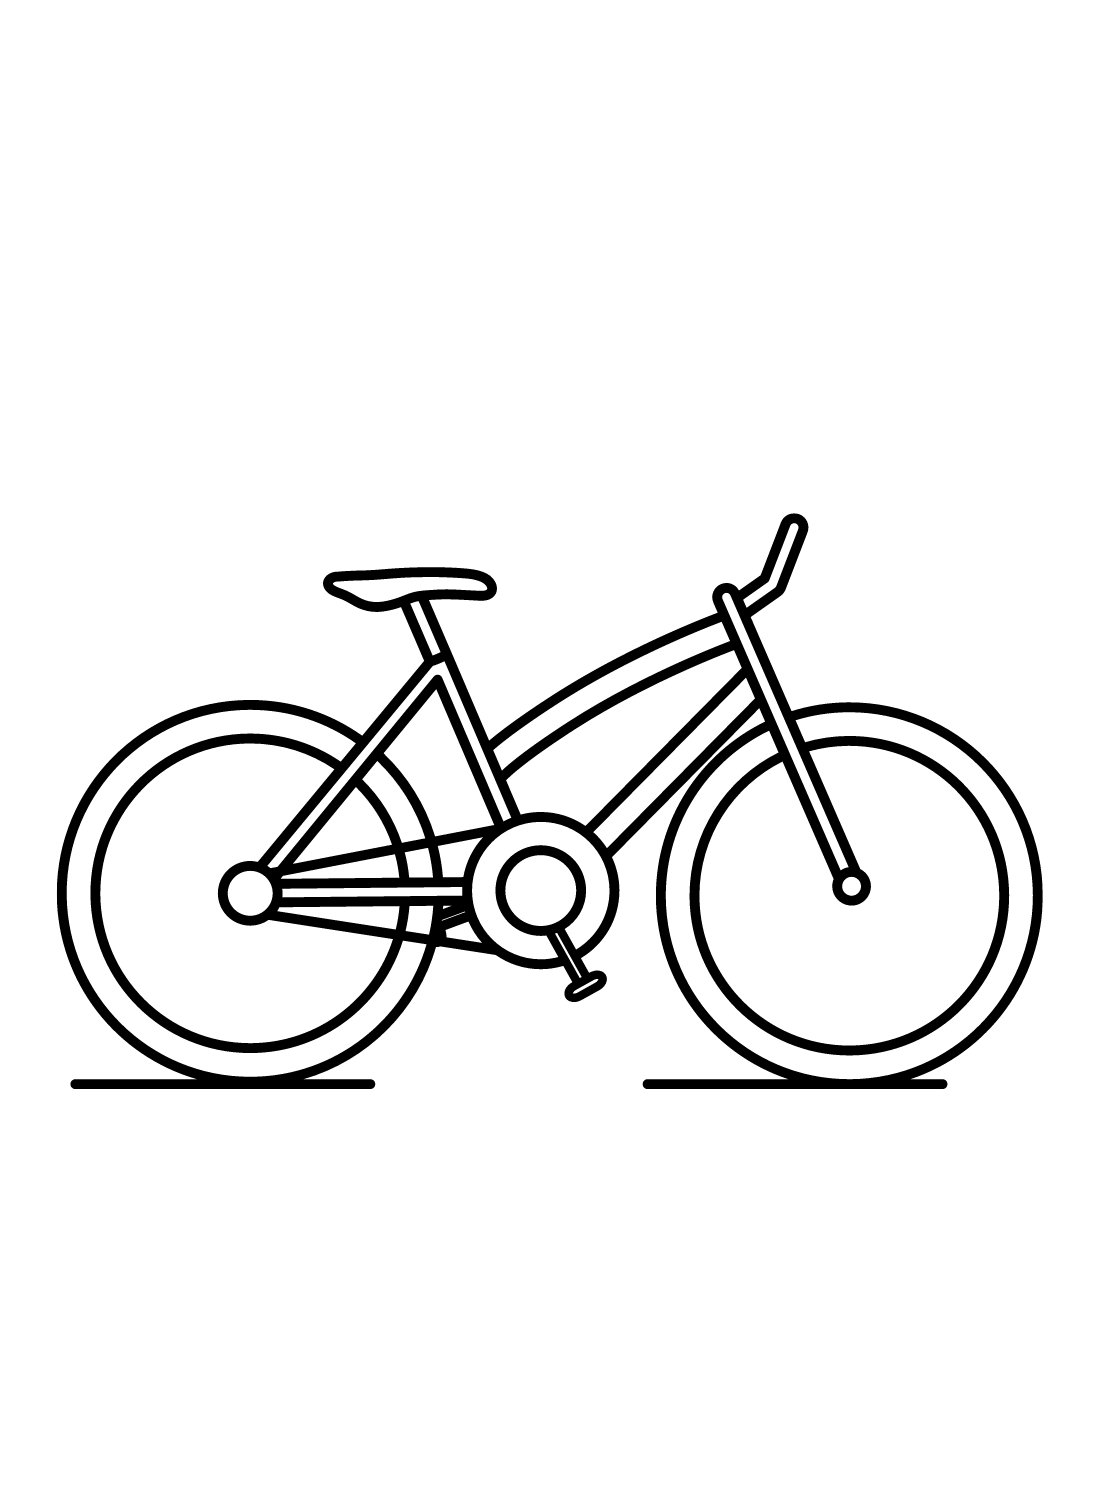 Bicycle Images Coloring Page